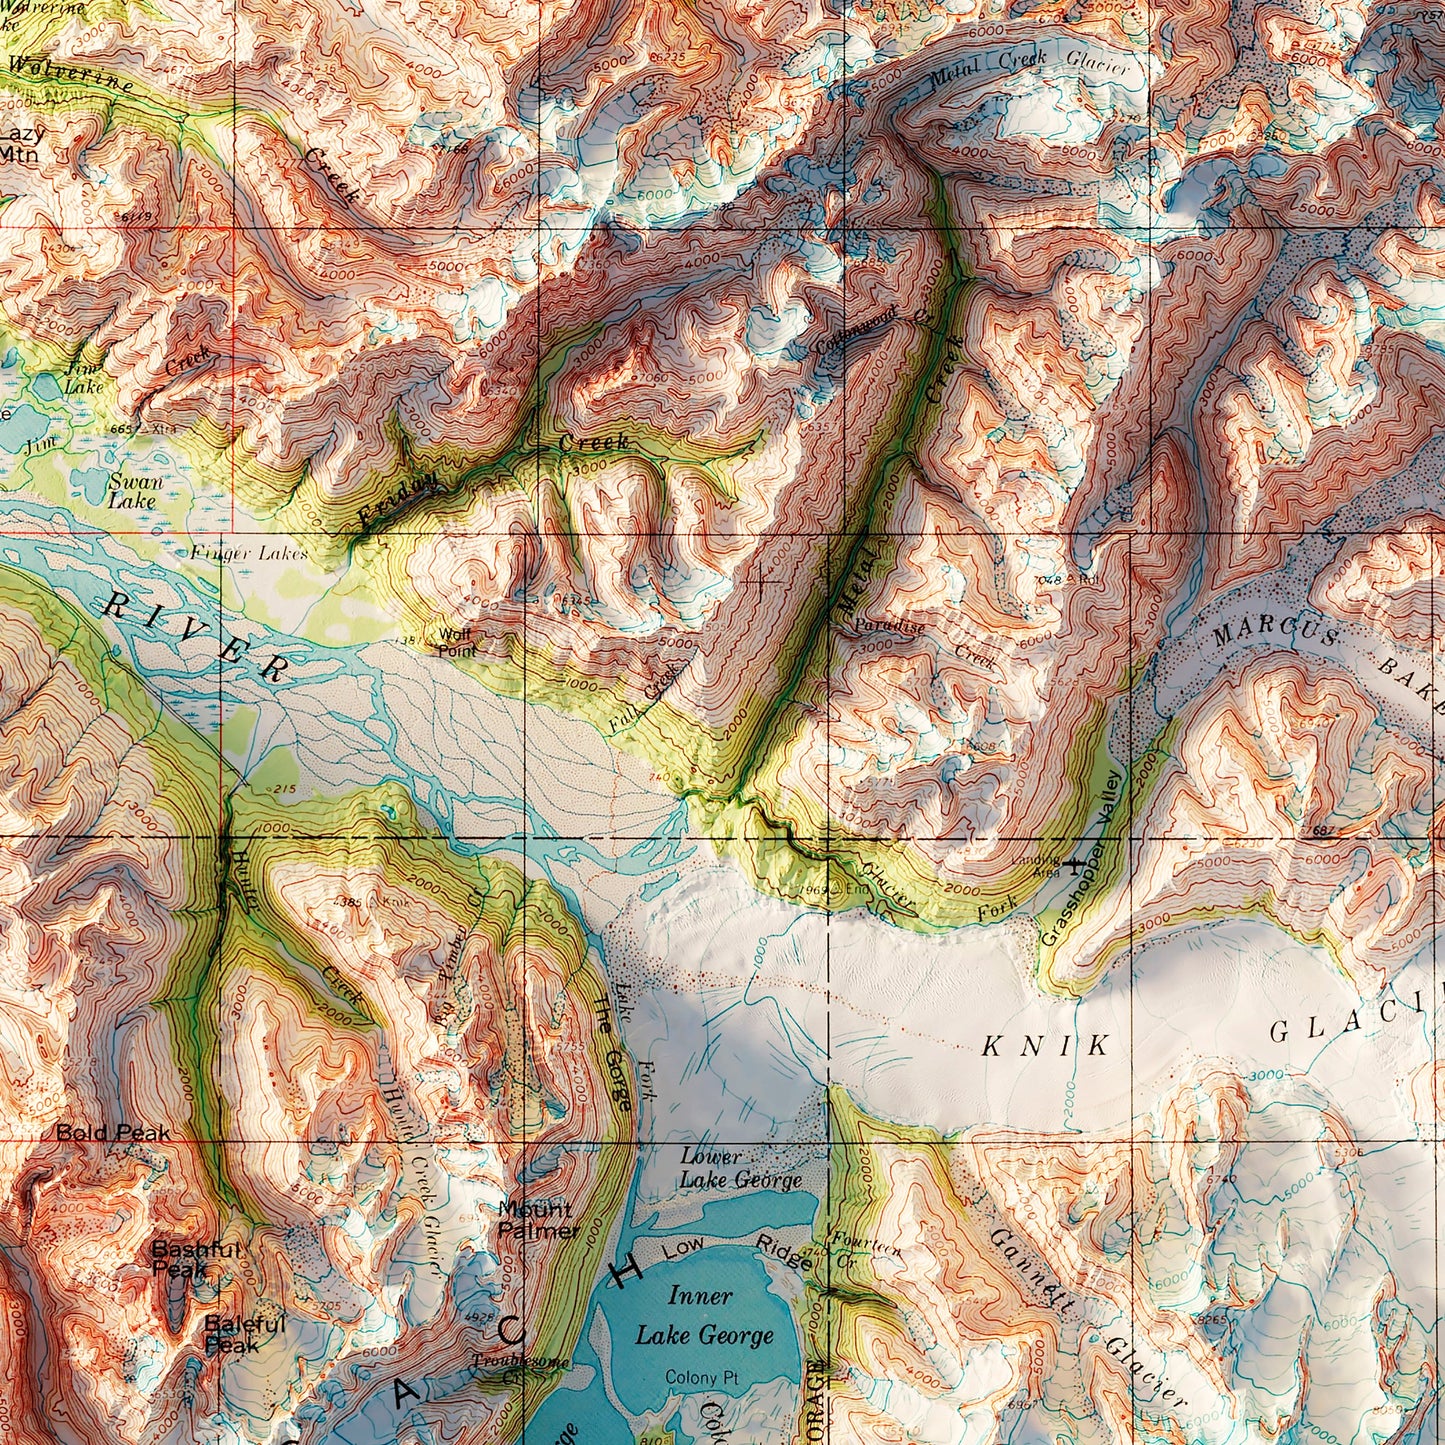 Anchorage, Alaska 1979 Shaded Relief Map